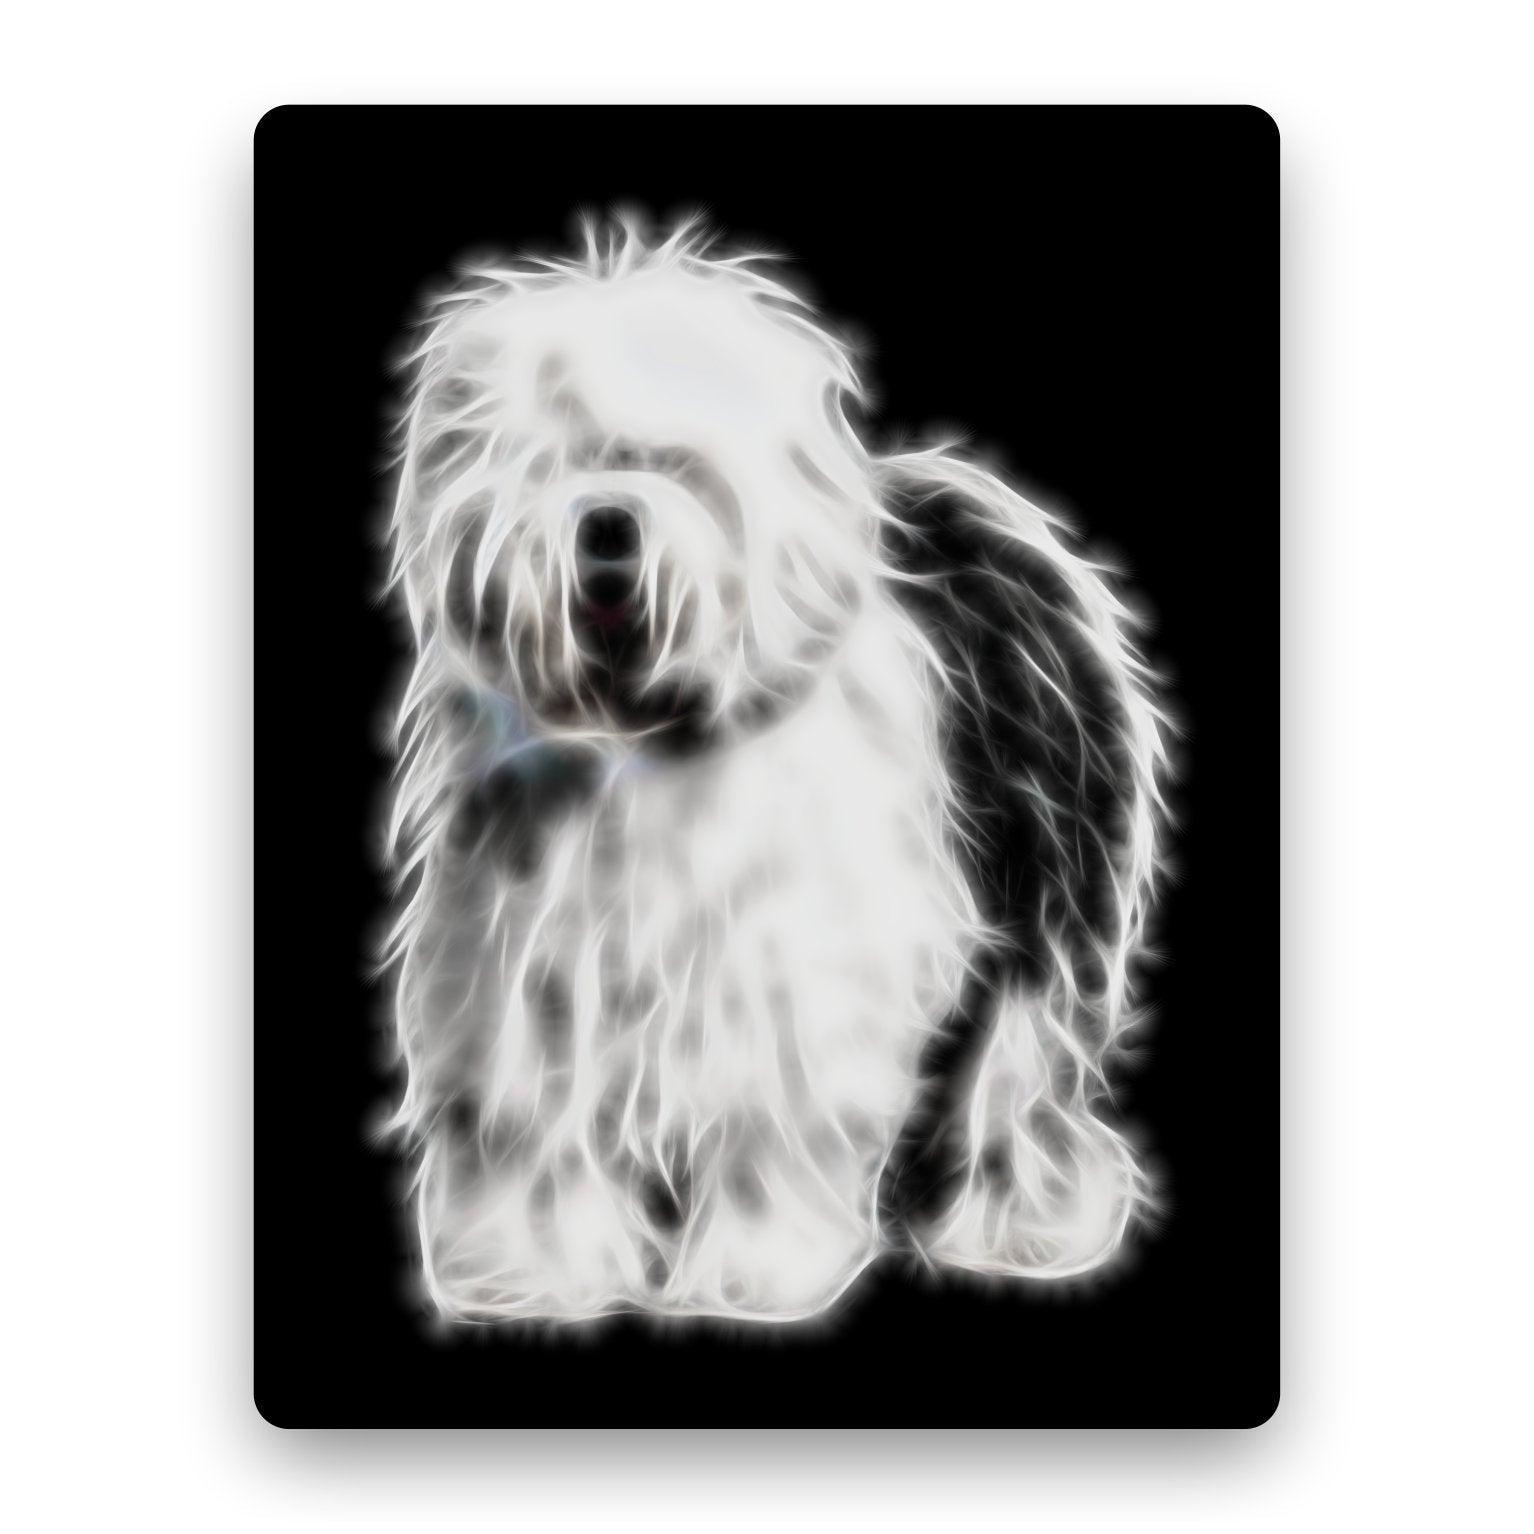 Old English Sheepdog Metal Wall Plaque with Stunning Fractal Art Design.